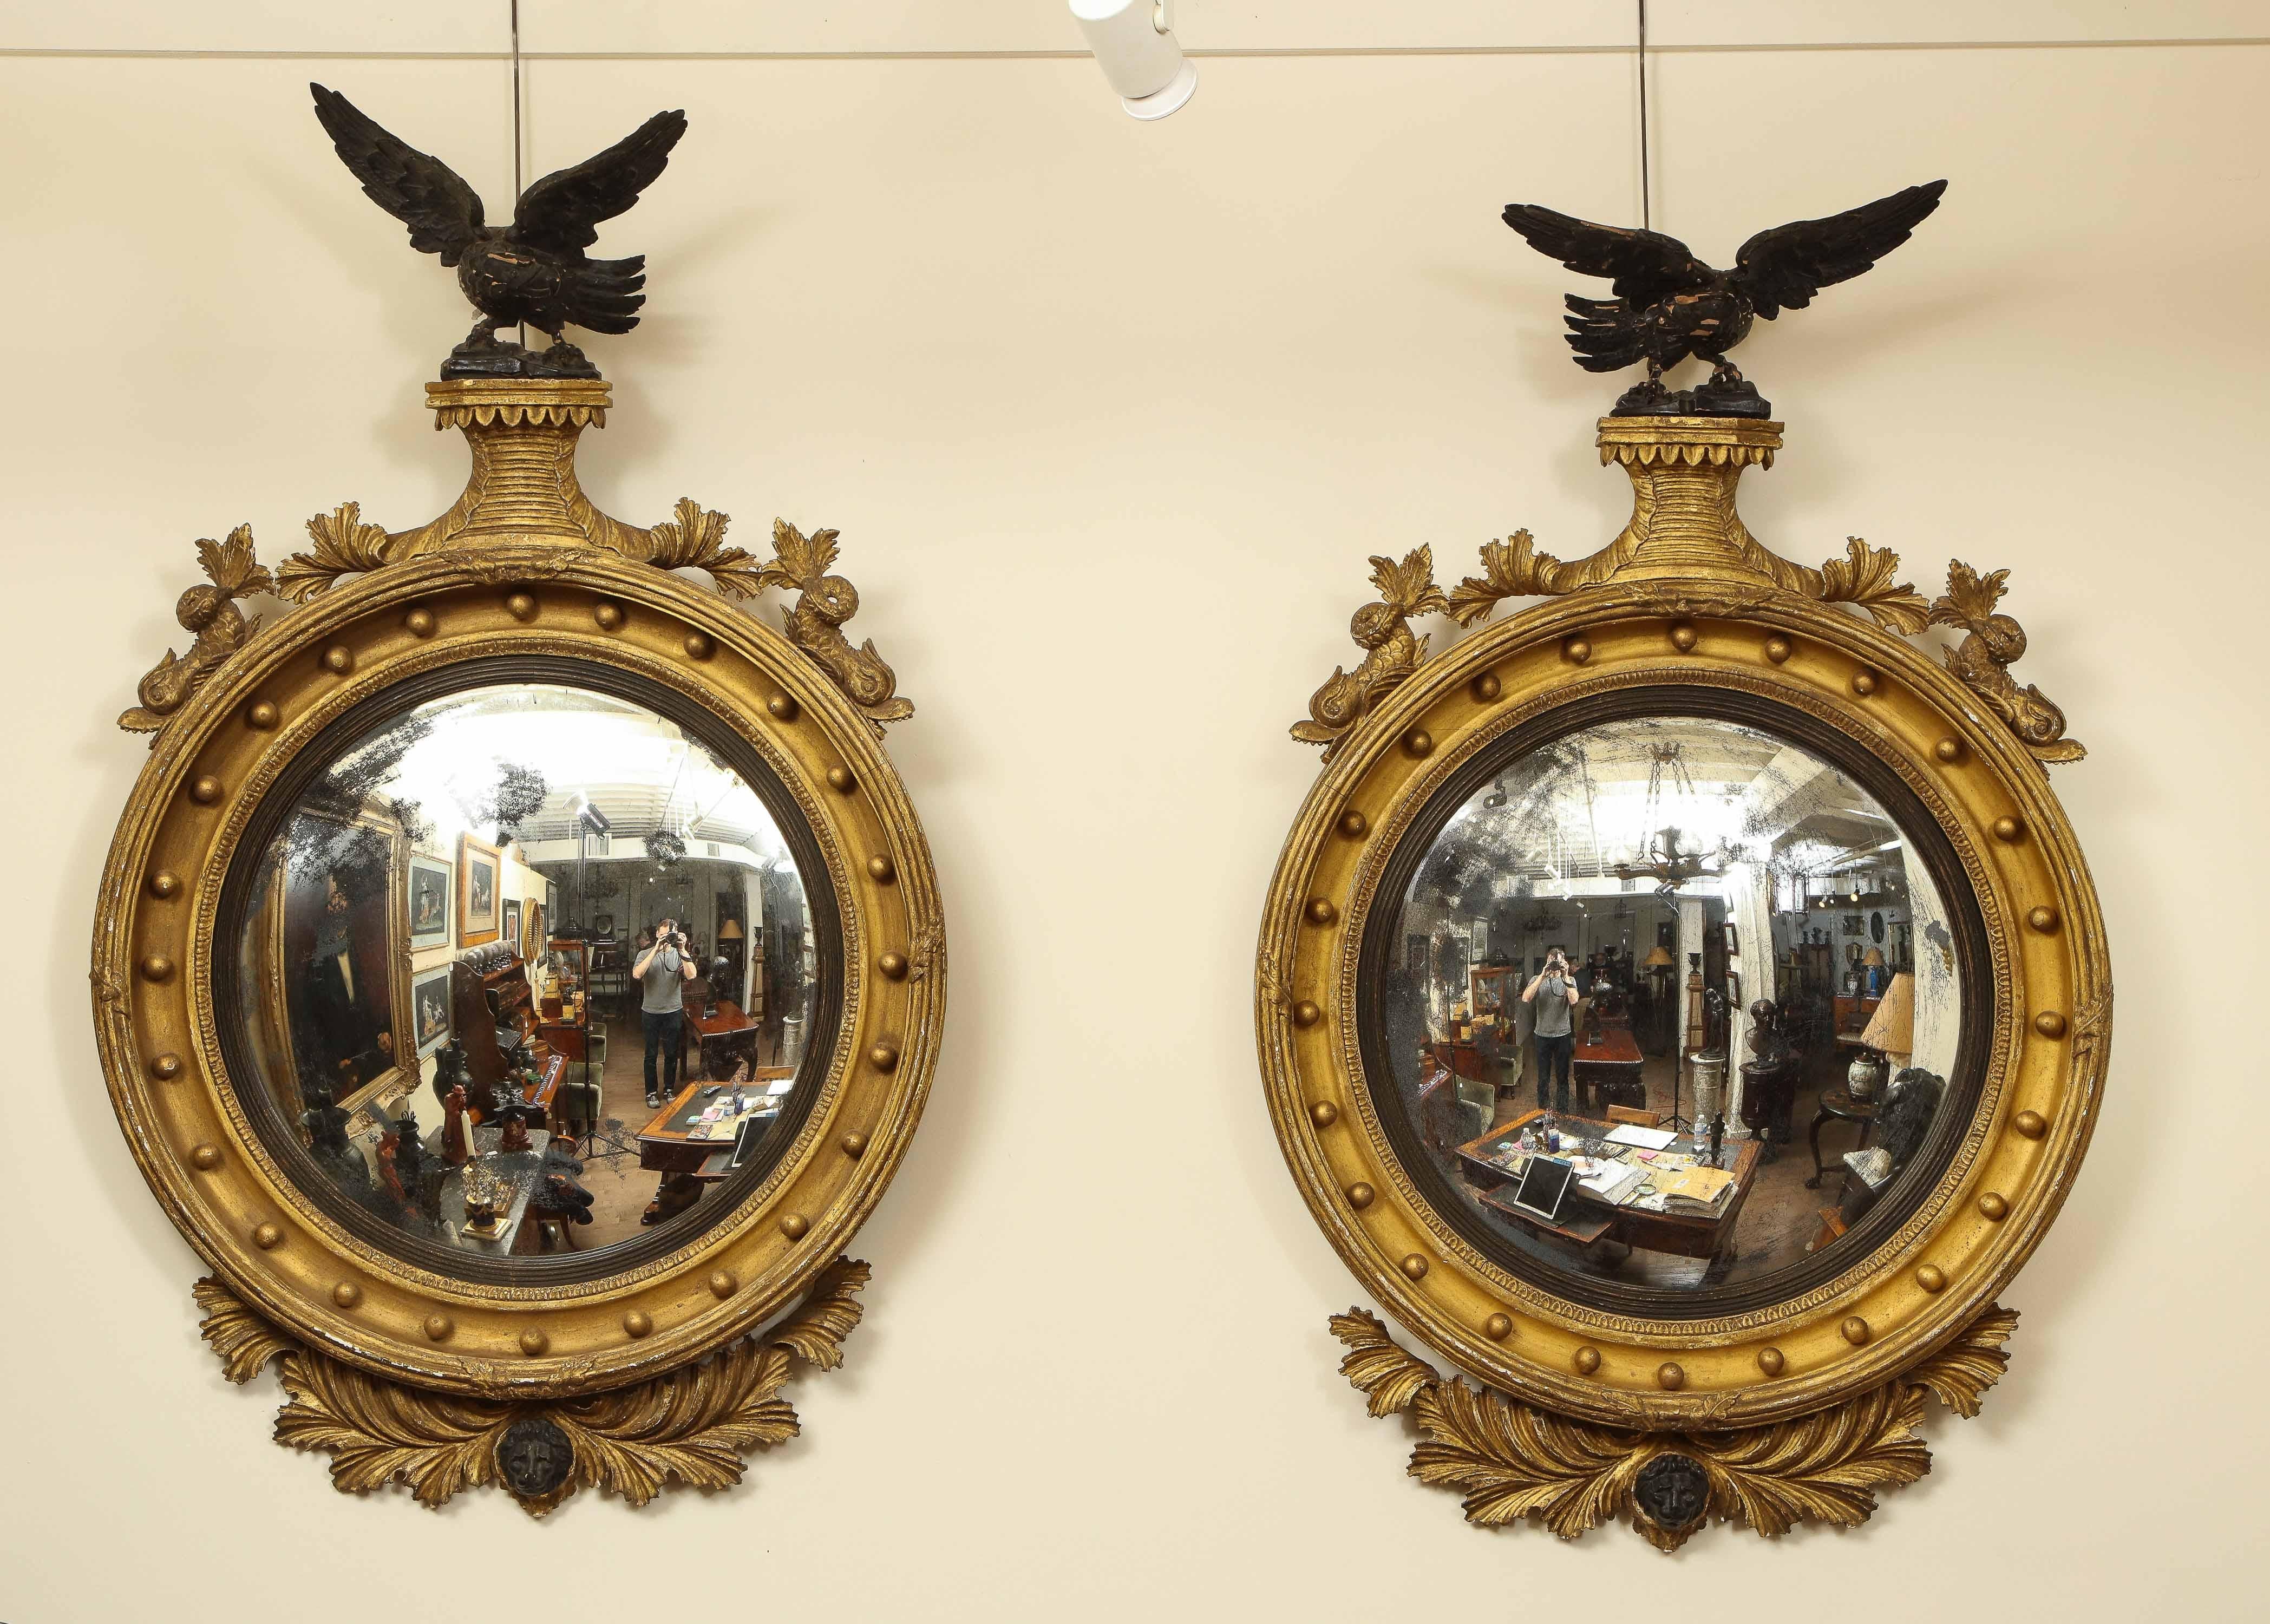 Two early 19th century English convex mirrors with eagles facing left and to the right. Dexter and Sinister.